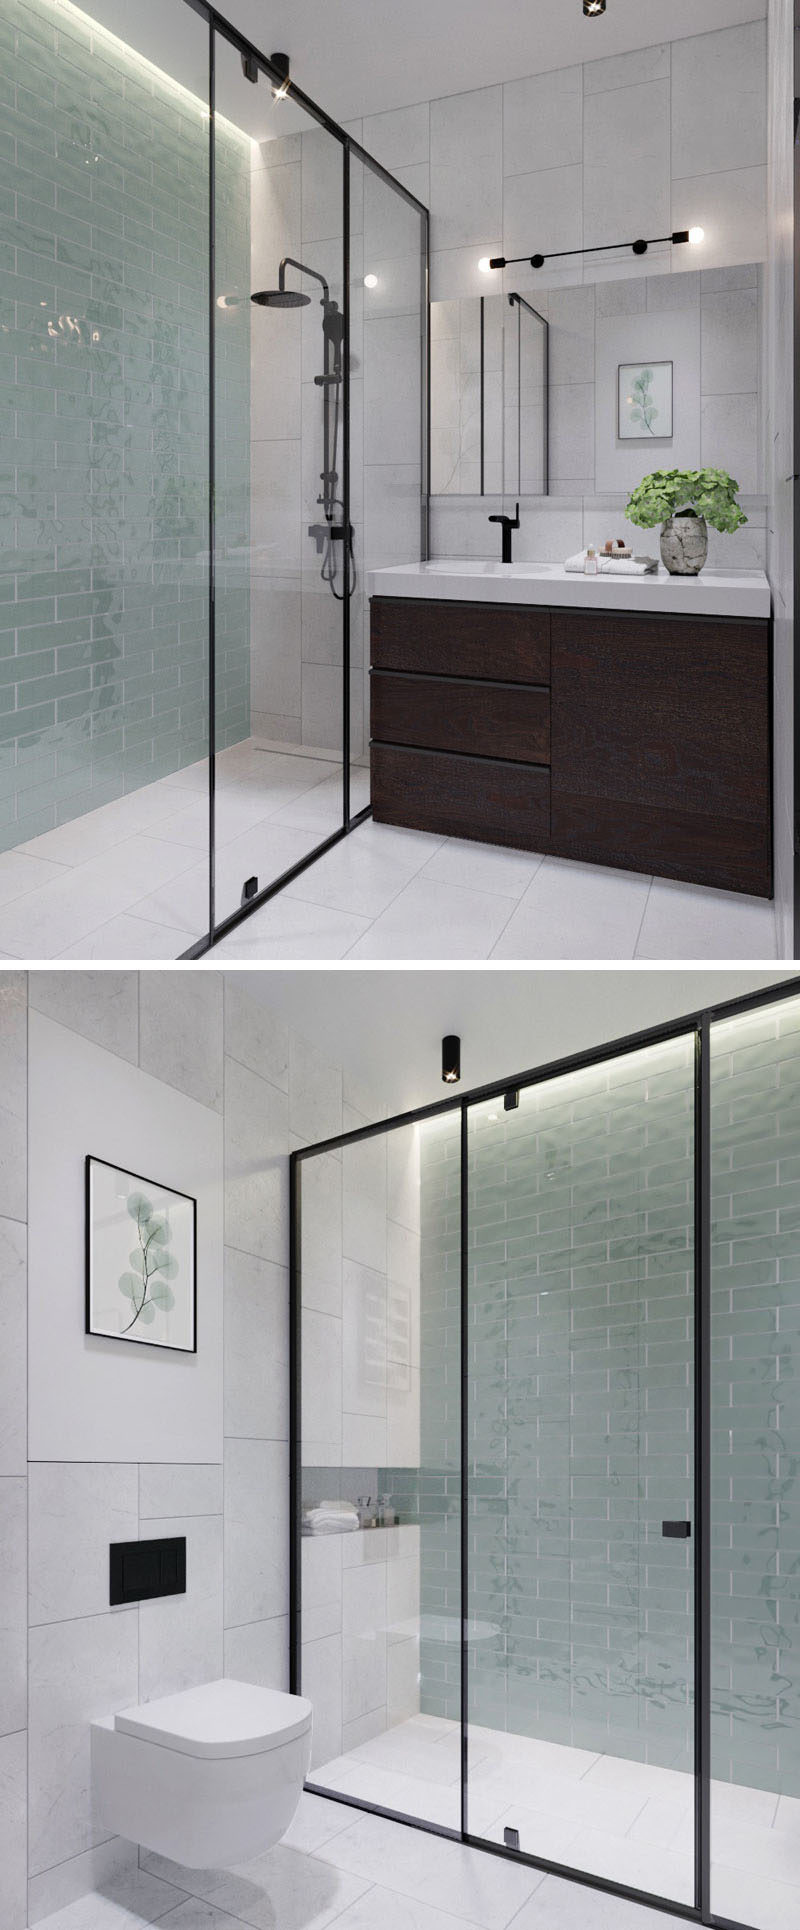 In this modern bathroom, floor-to-ceiling light green tiles add a soft touch of color to the otherwise black, white and wood interior. In the black framed glass enclosed shower, there's hidden lighting to add a calming glow to the bathroom. #ModernBathroom #BathroomDesign